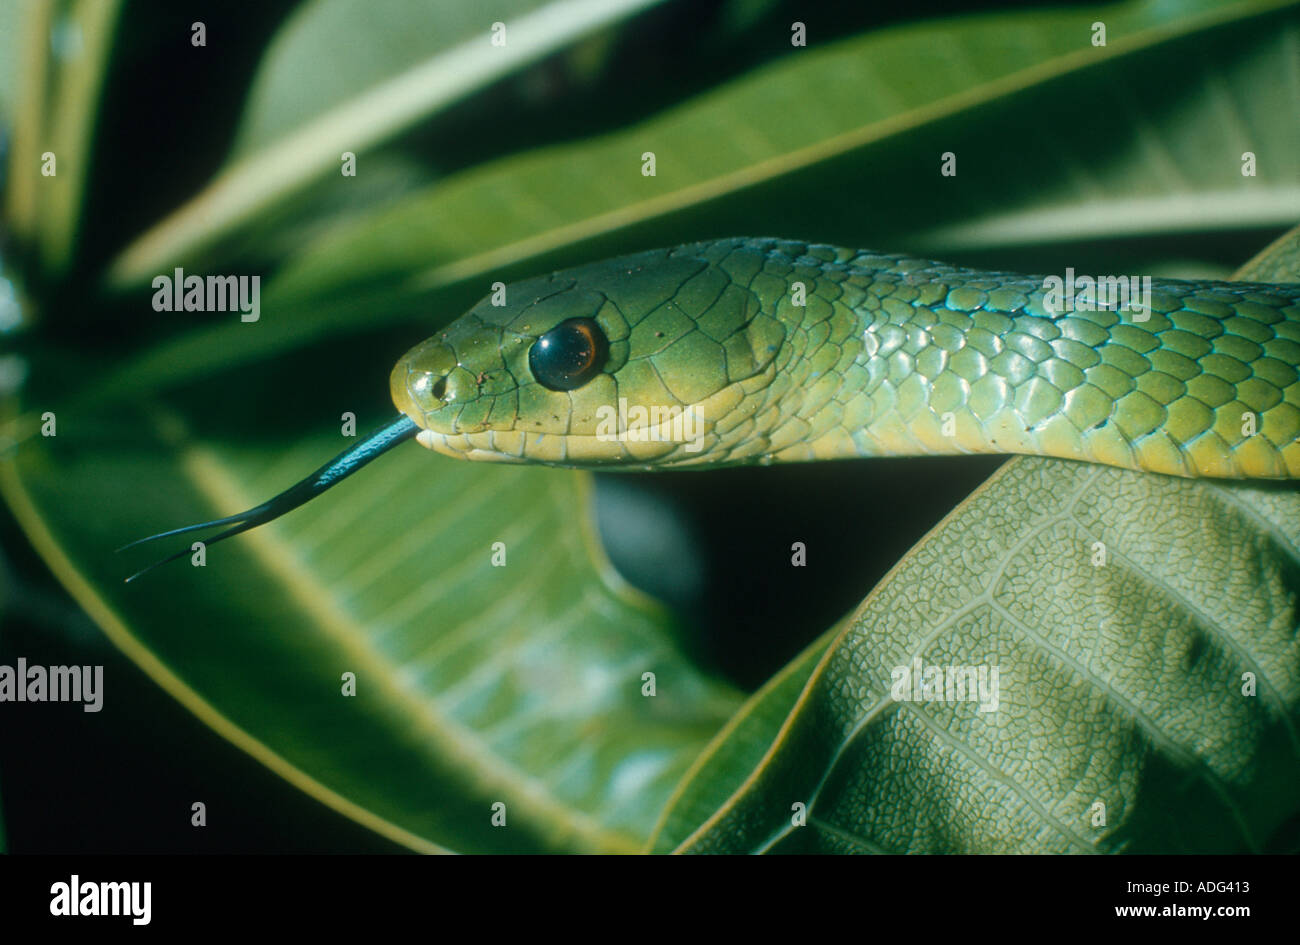 West African Green Bush Viper (Atheris chlorechis) / NATURE's WINDOW